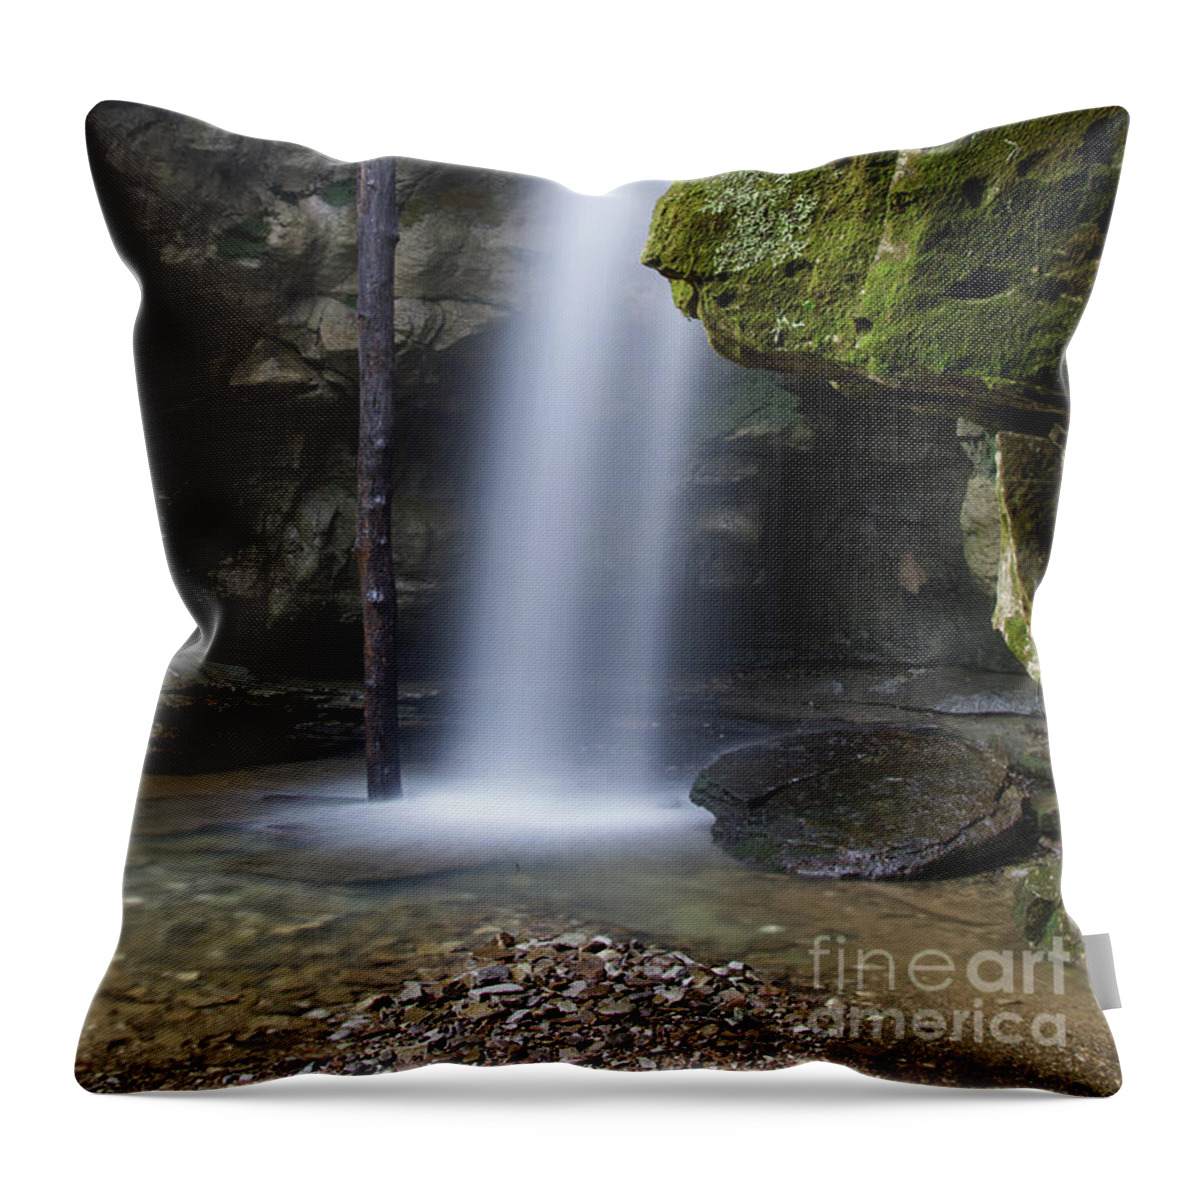 Cumberland Plateau Throw Pillow featuring the photograph Lost Creek Falls 29 by Phil Perkins